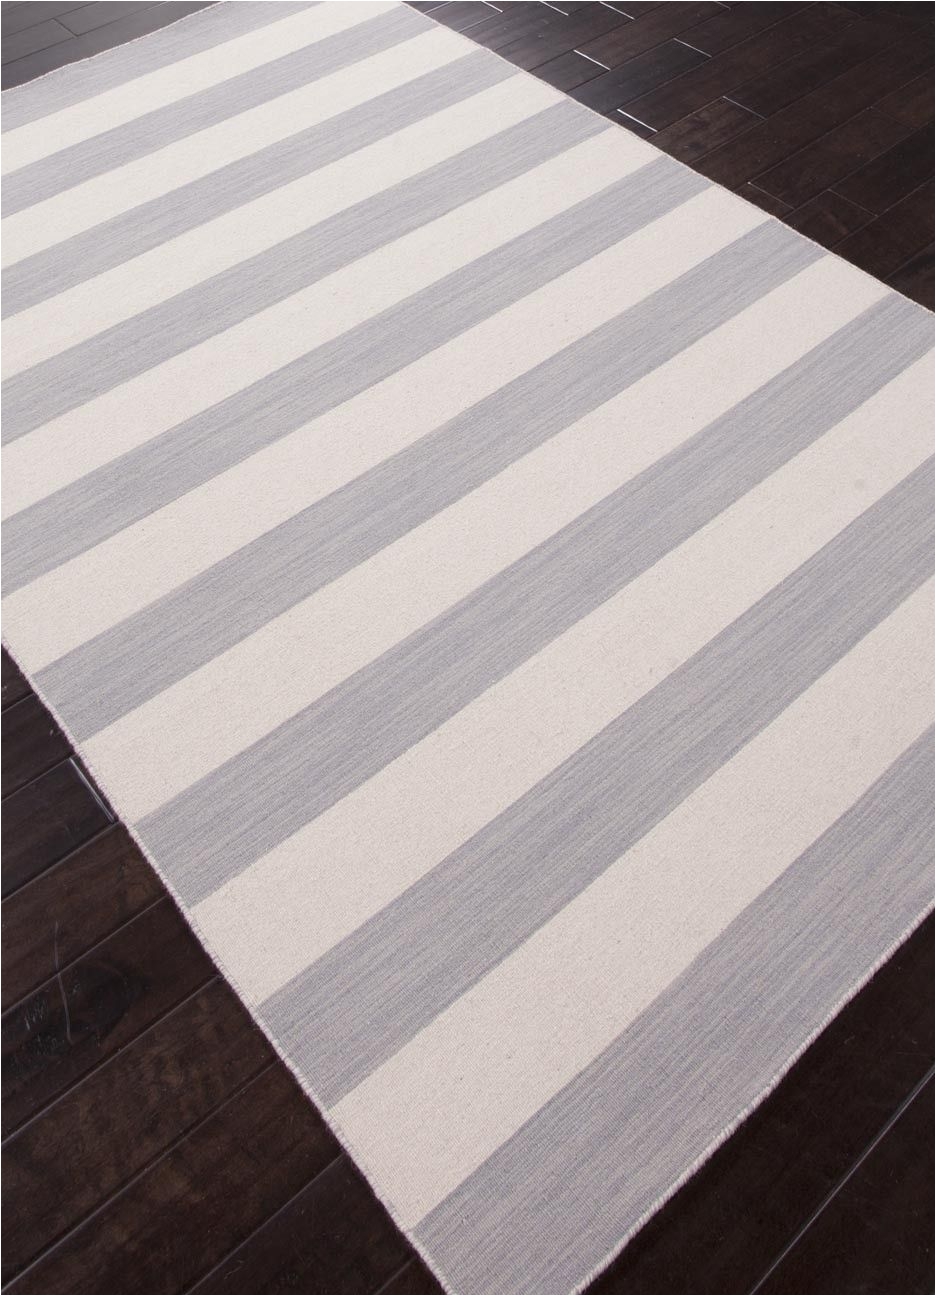 dias collection from jaipur gray and white striped area rug